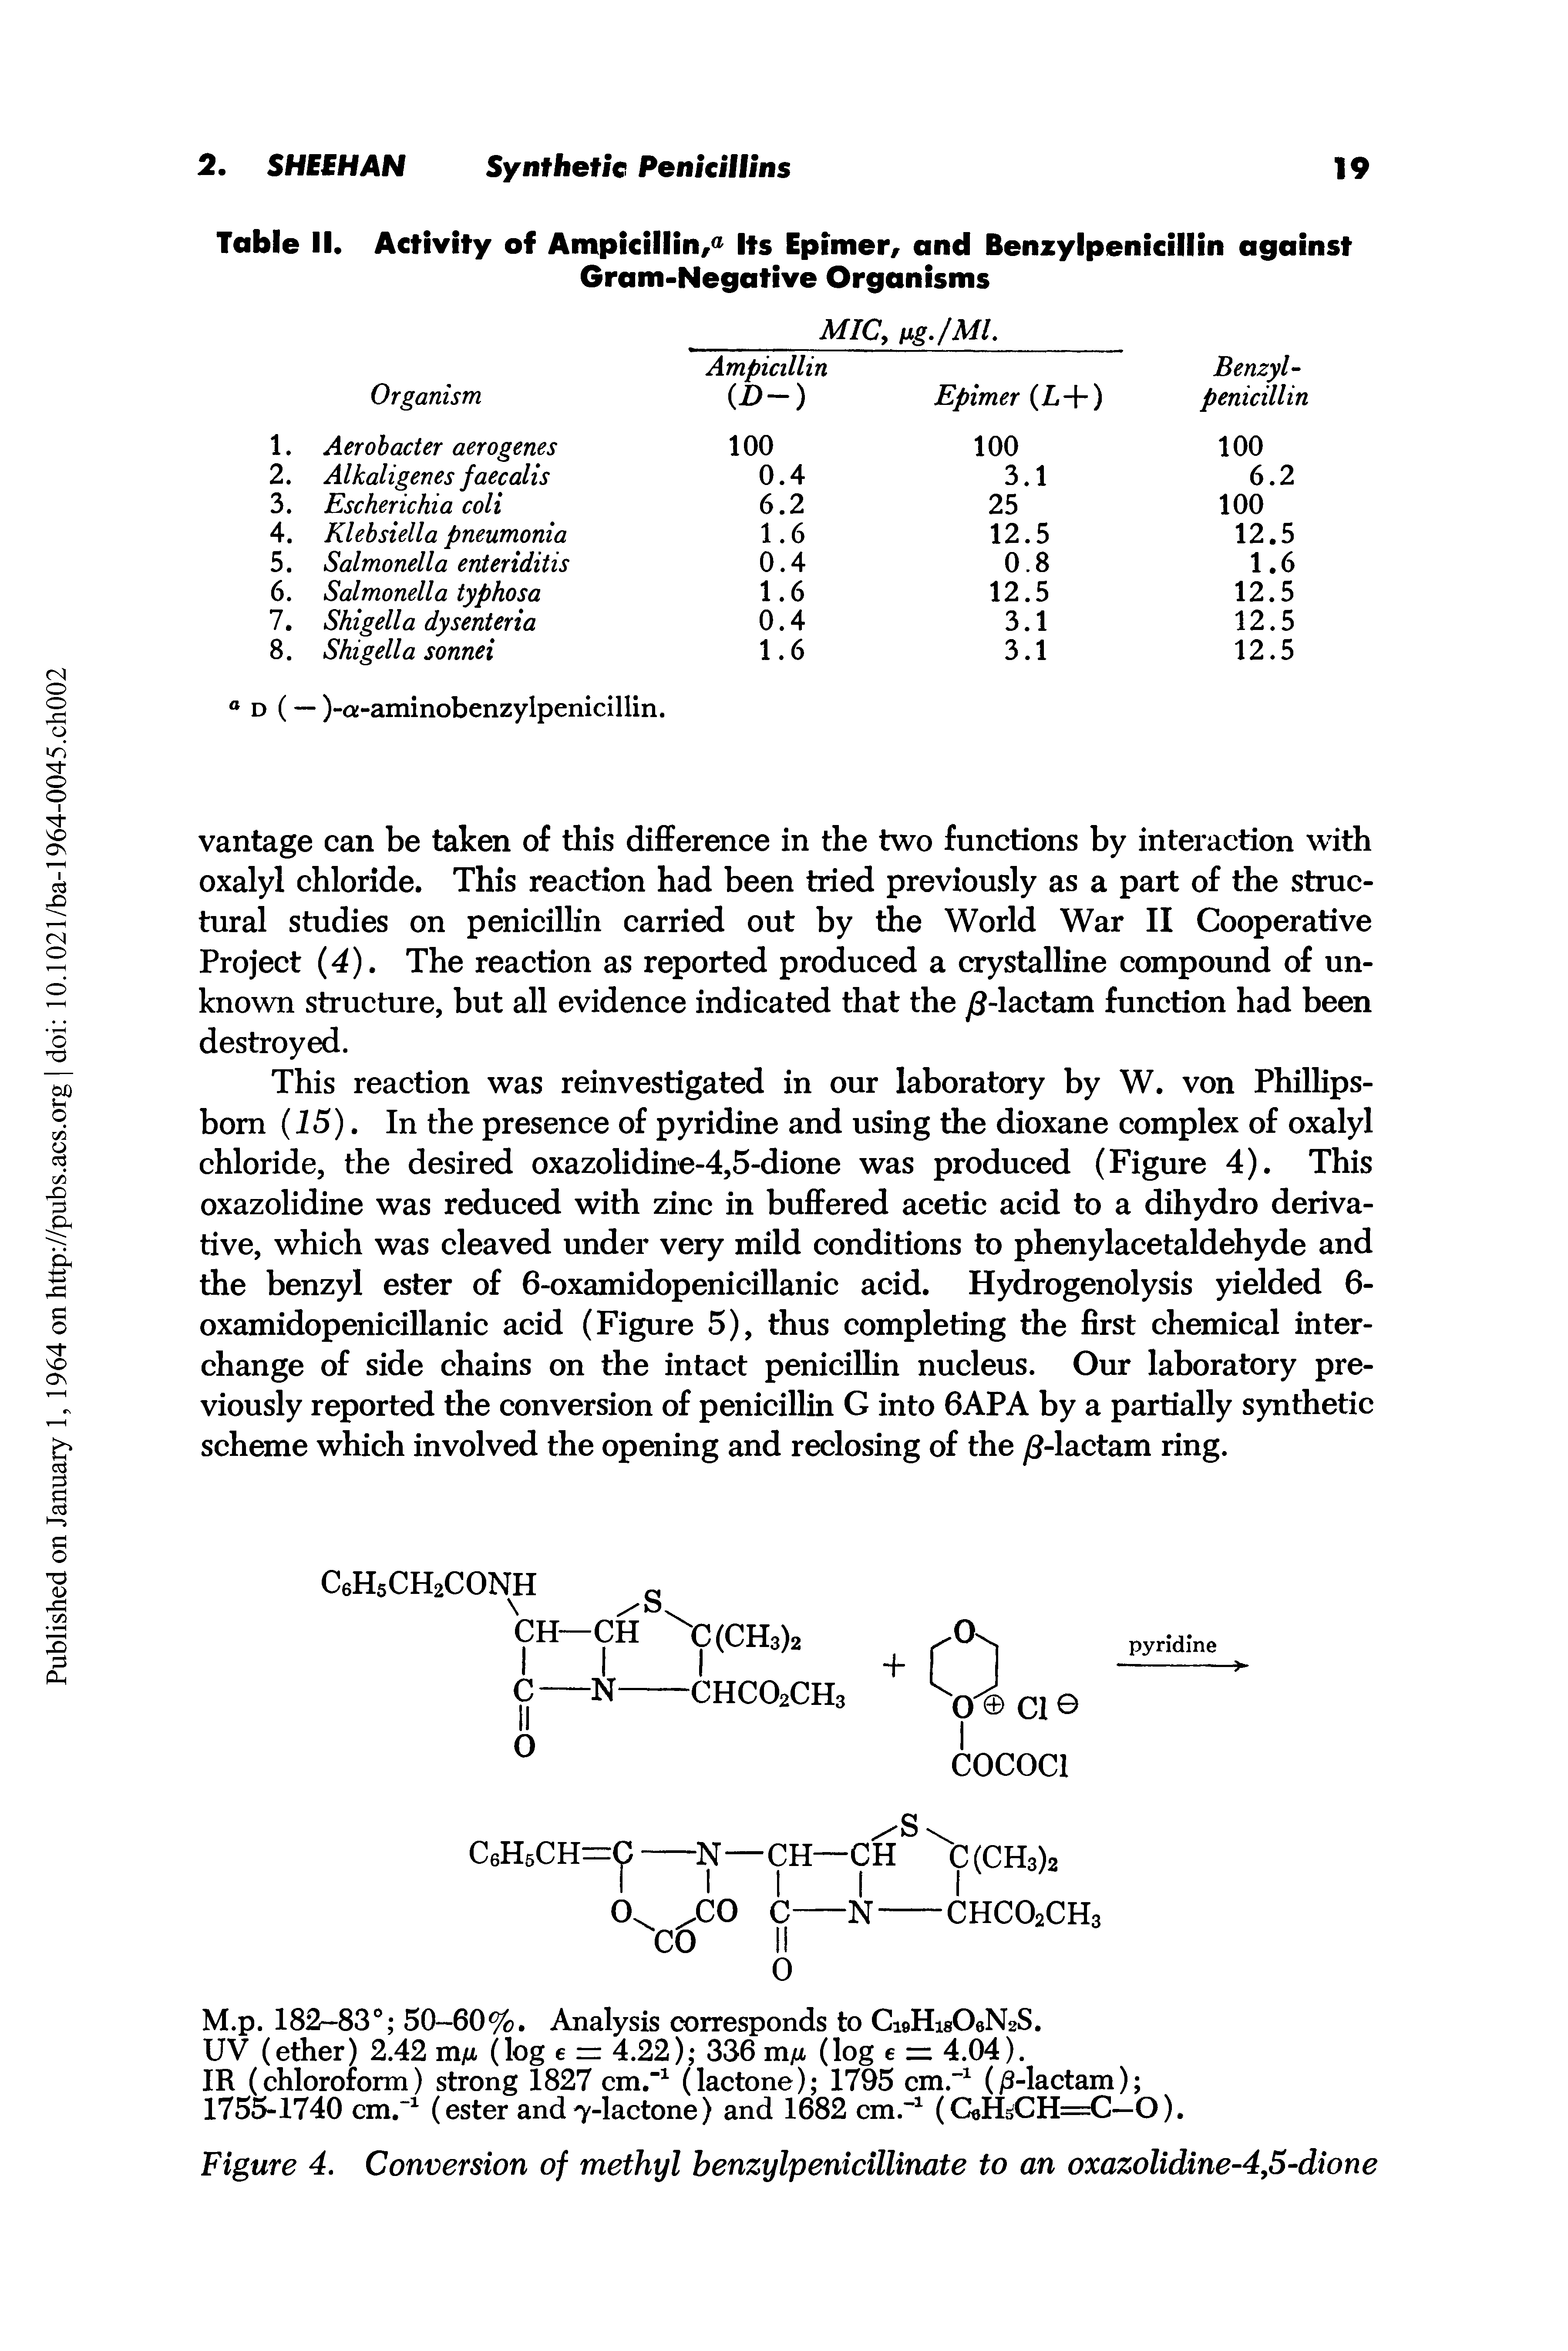 Figure 4. Conversion of methyl benzylpenicillinate to an oxazolidine-4,5-dione...